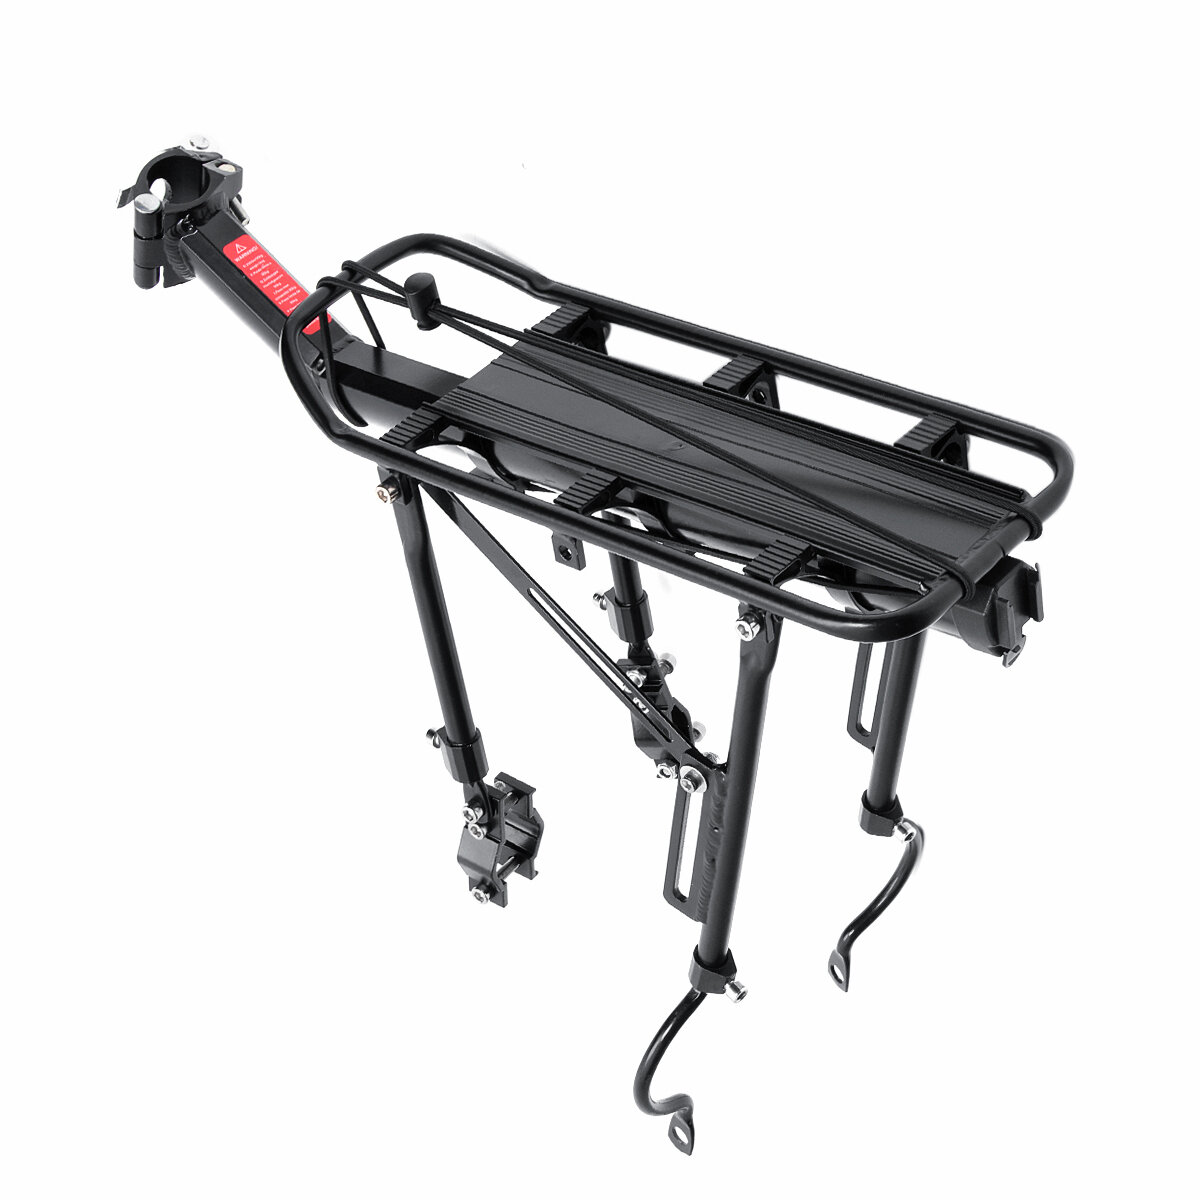 

MTB Universal Bike Rear Luggage Carrier Aluminum Alloy Bicycle Luggage Rack Max Load 90kg